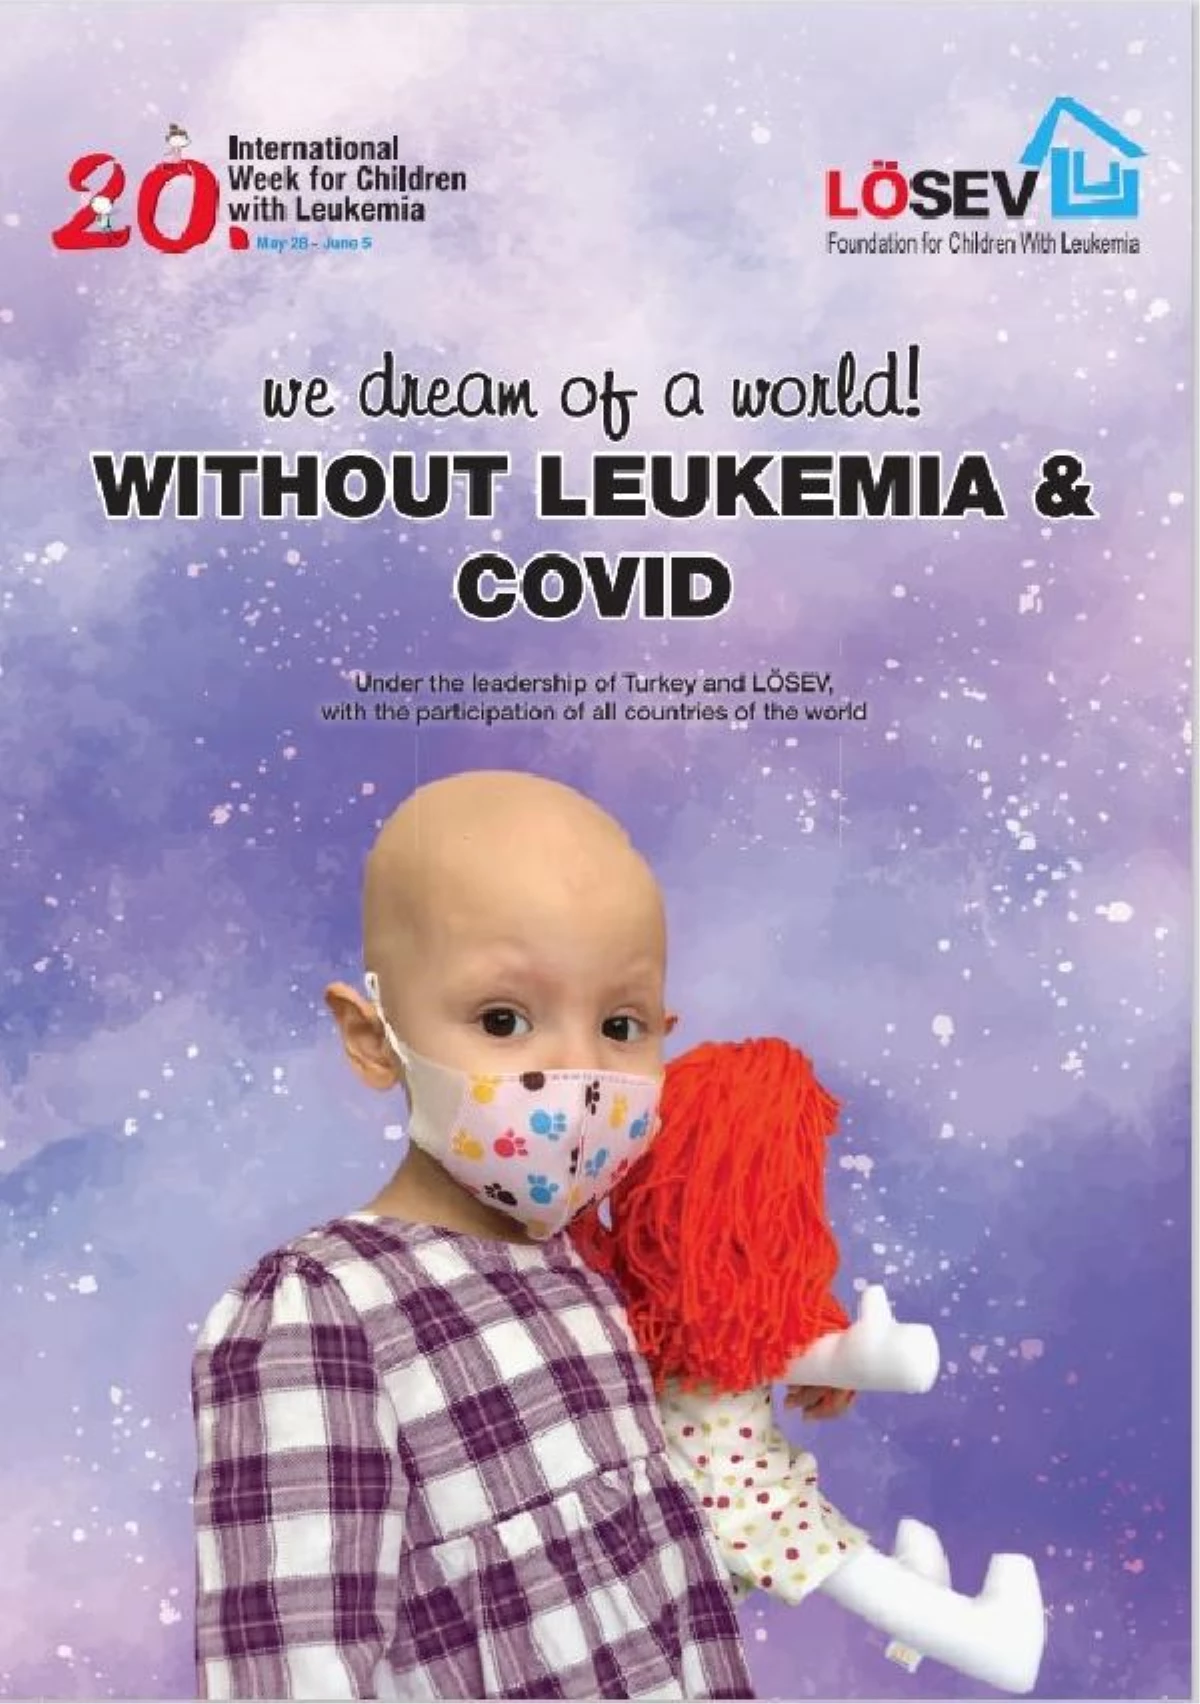 "We dream of a world without leukemia and Covid"